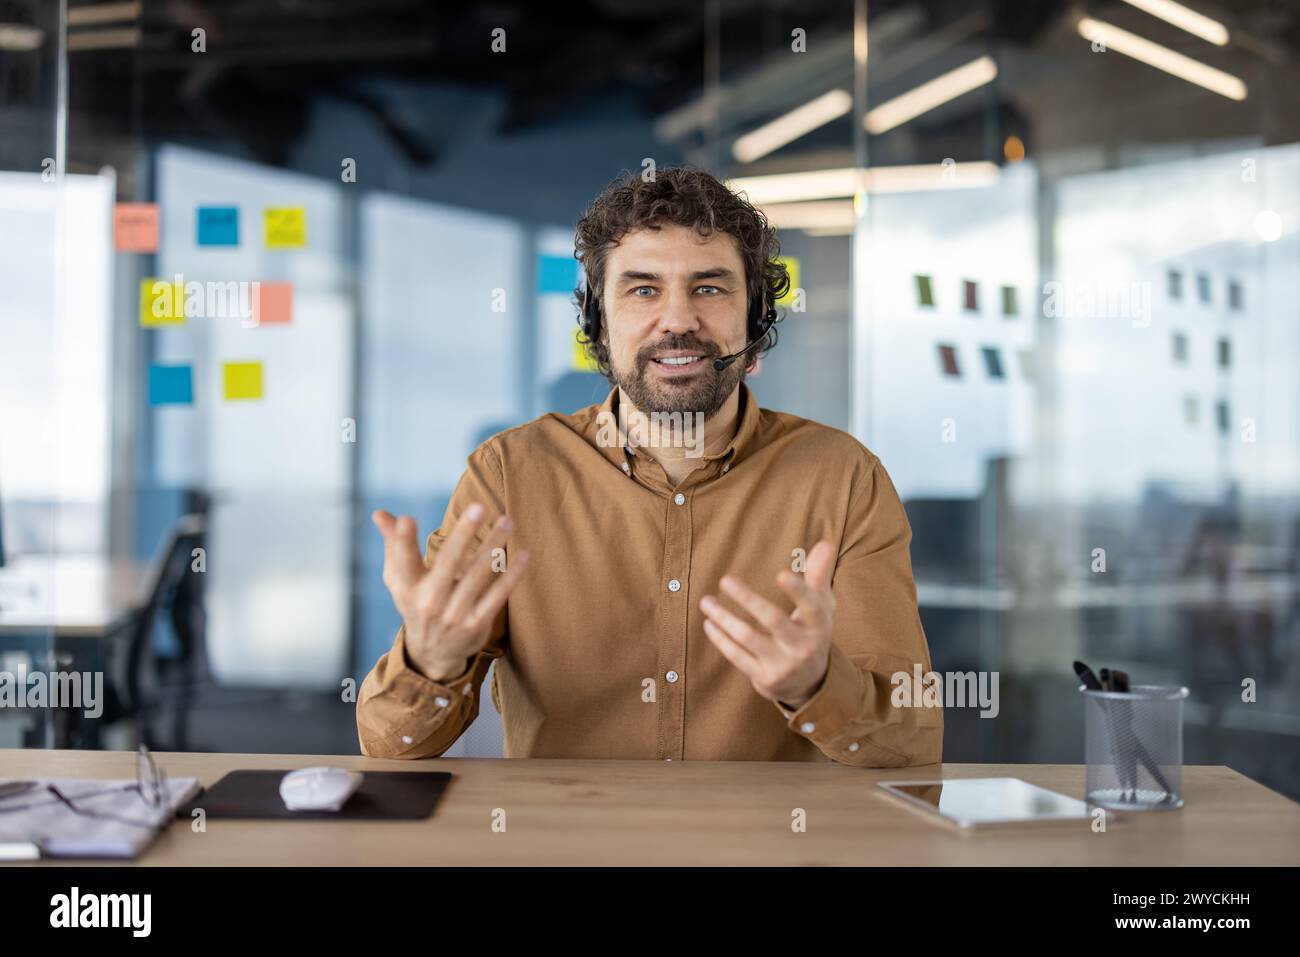 Smiling male professional with headset engaging in a business conversation in a contemporary workspace with sticky notes in background. Stock Photo